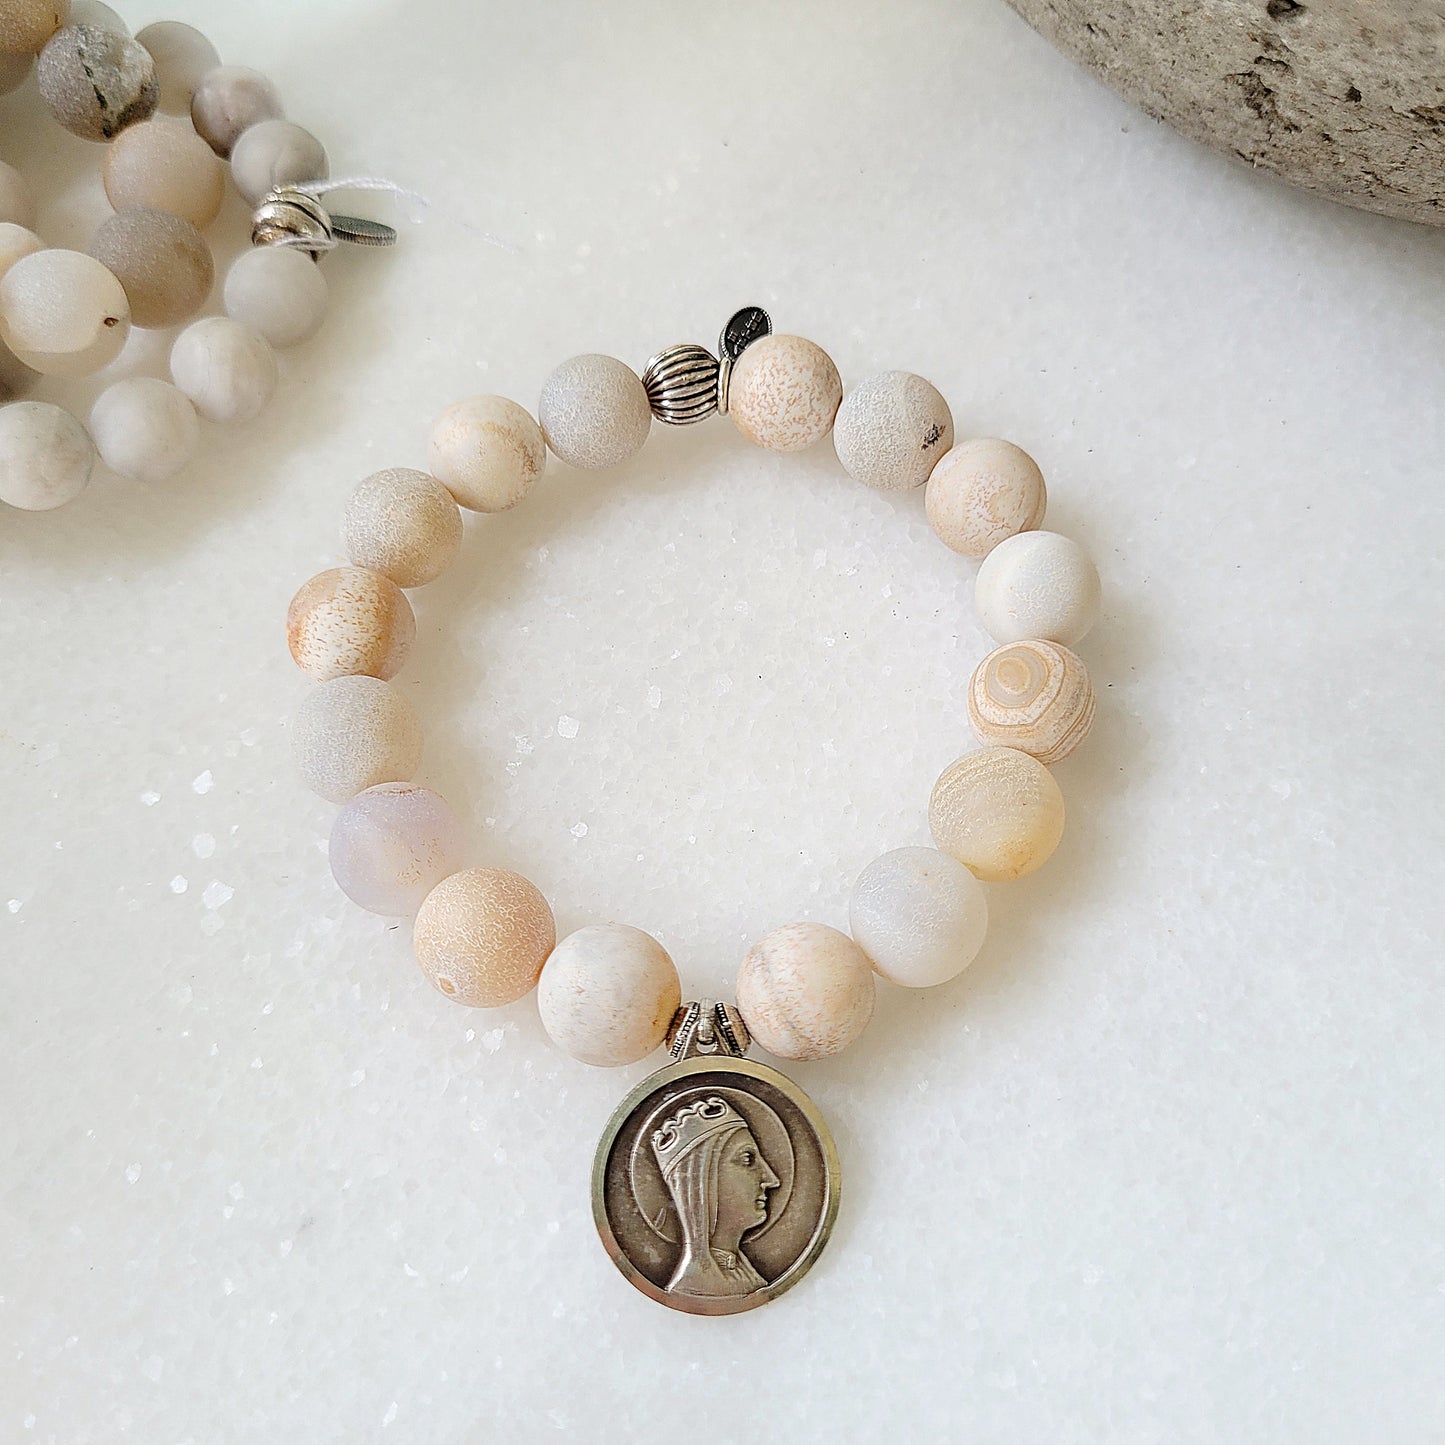 Druzy Agate 10mm Beaded Bracelet with Spanish Blessed Mother Mary + Sacred Heart of Jesus Medal - Afterlife Jewelry Designs